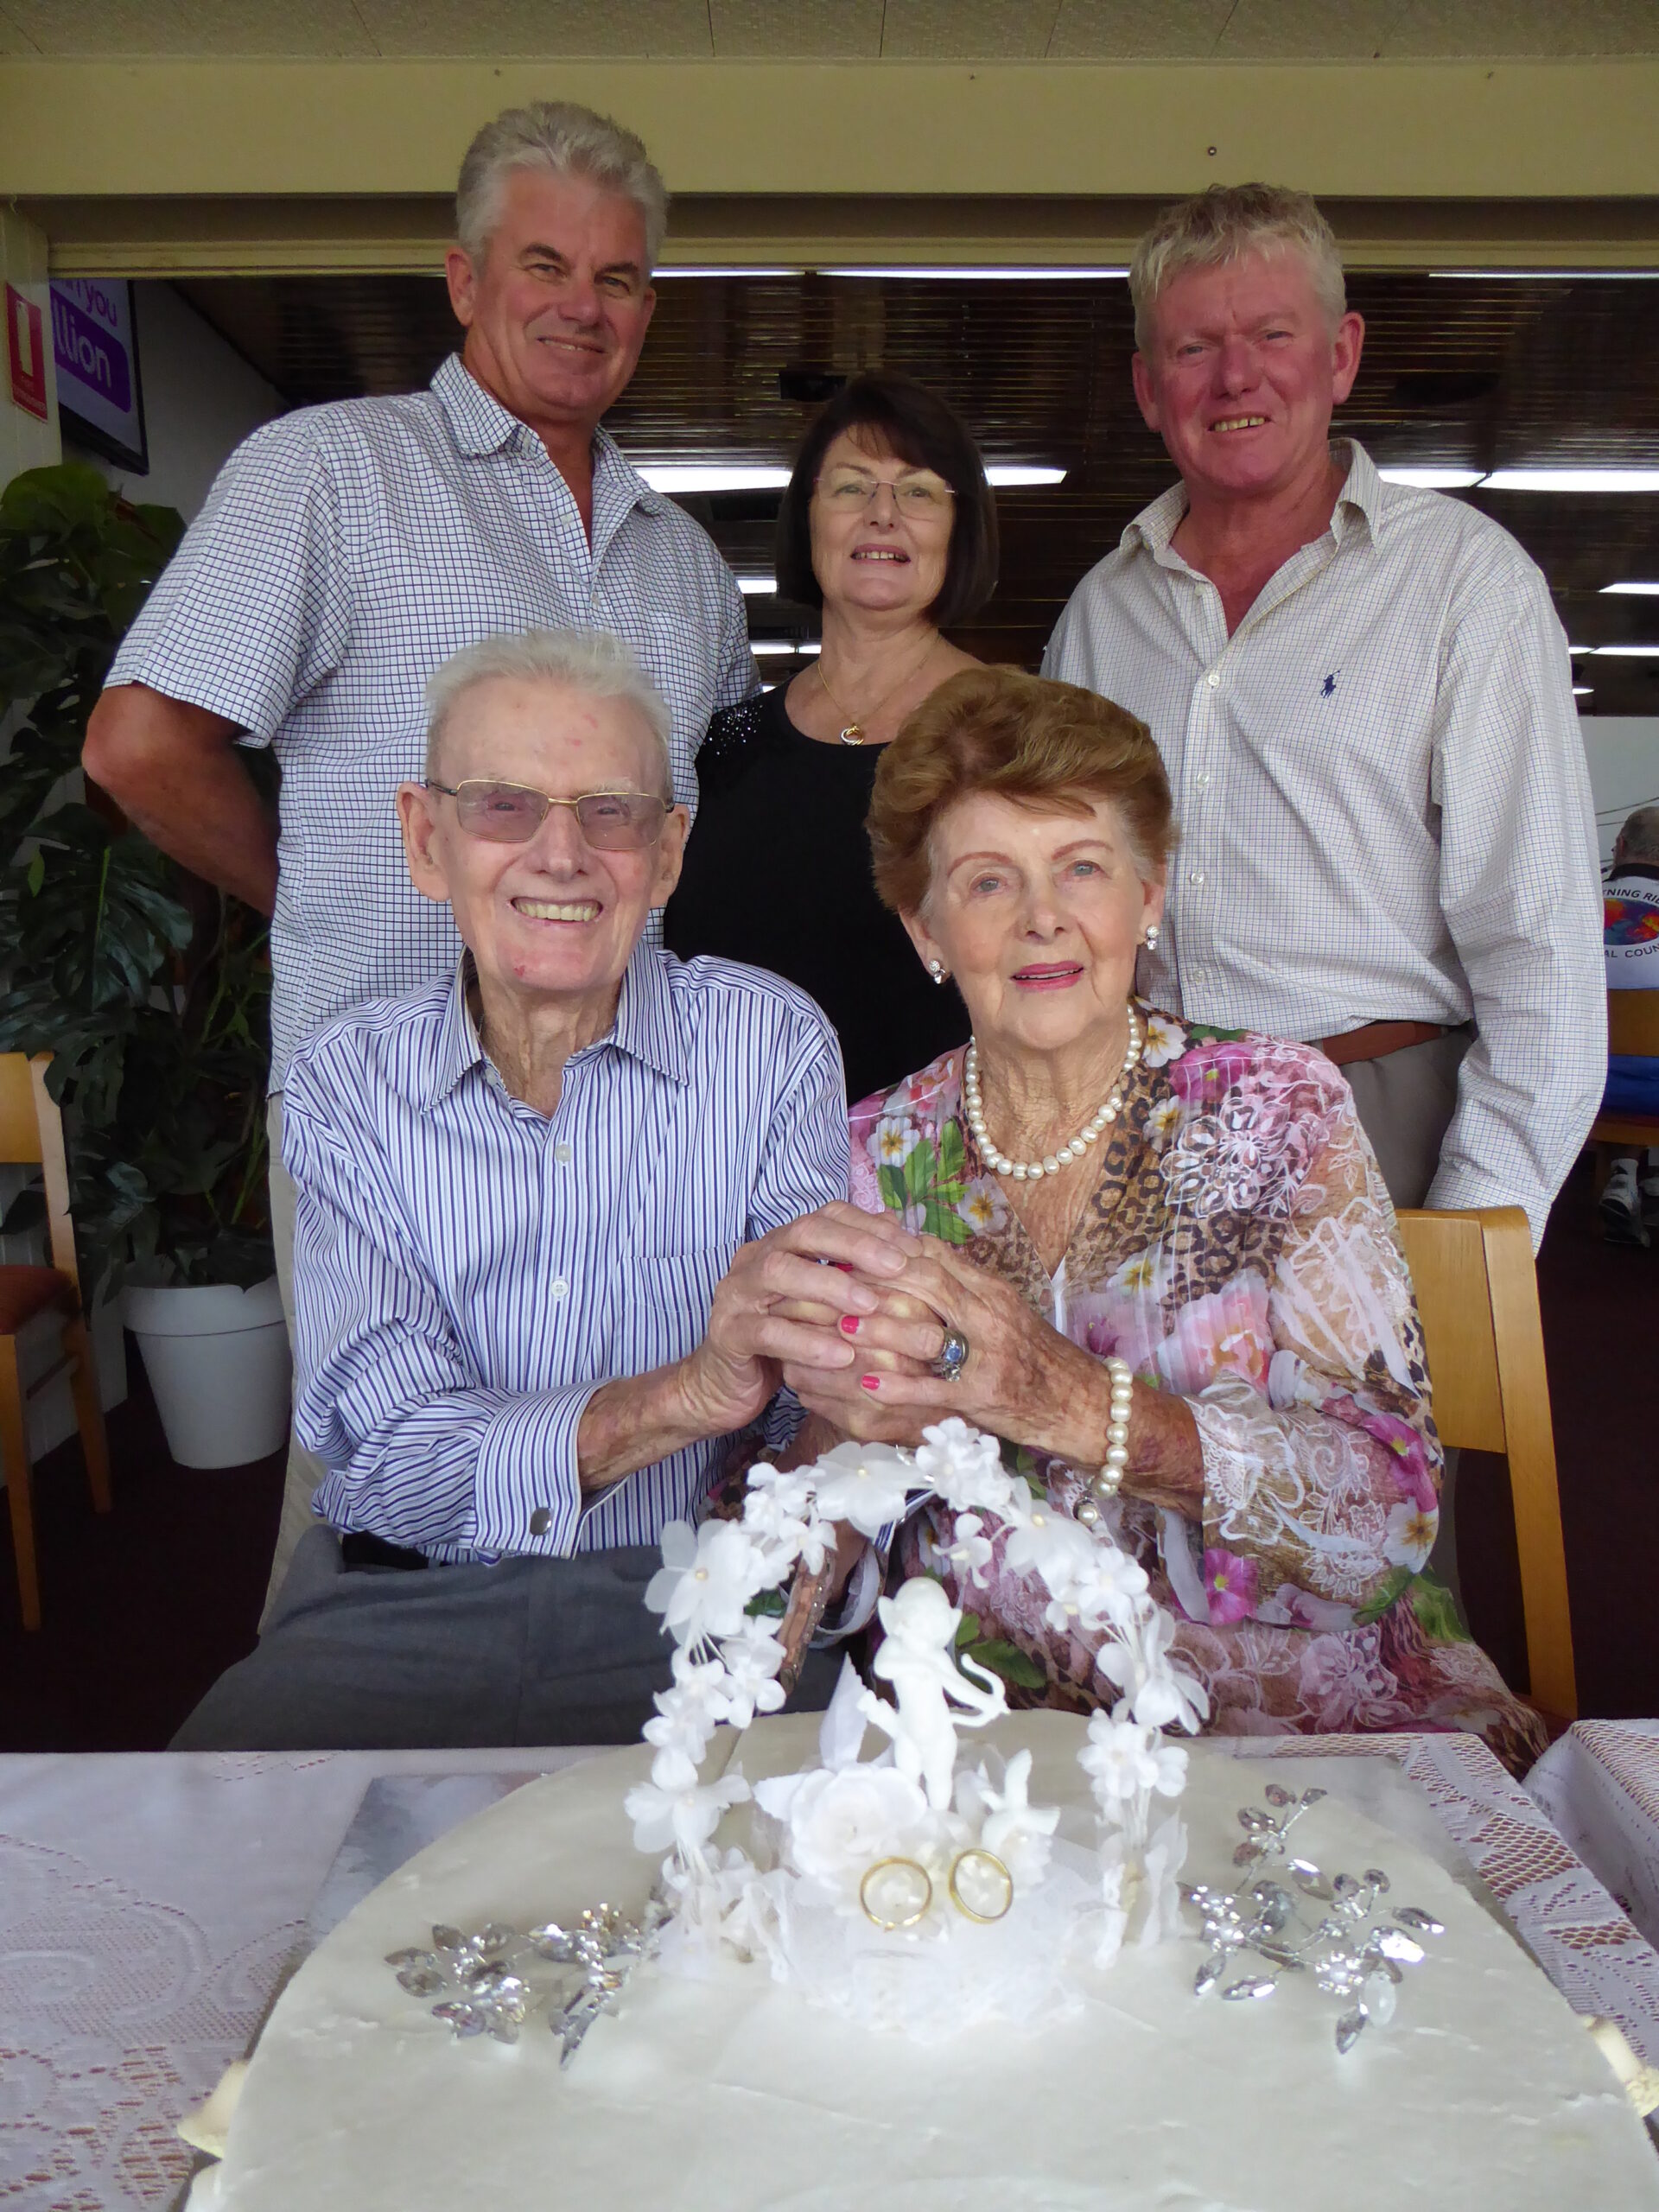 Bill and Beryl Heath on the occasion of their 70th wedding anniversary. Back, siblings Martin Heath, Neurelle McTaggart and Robert Heath, front Bill and Beryl Heath.